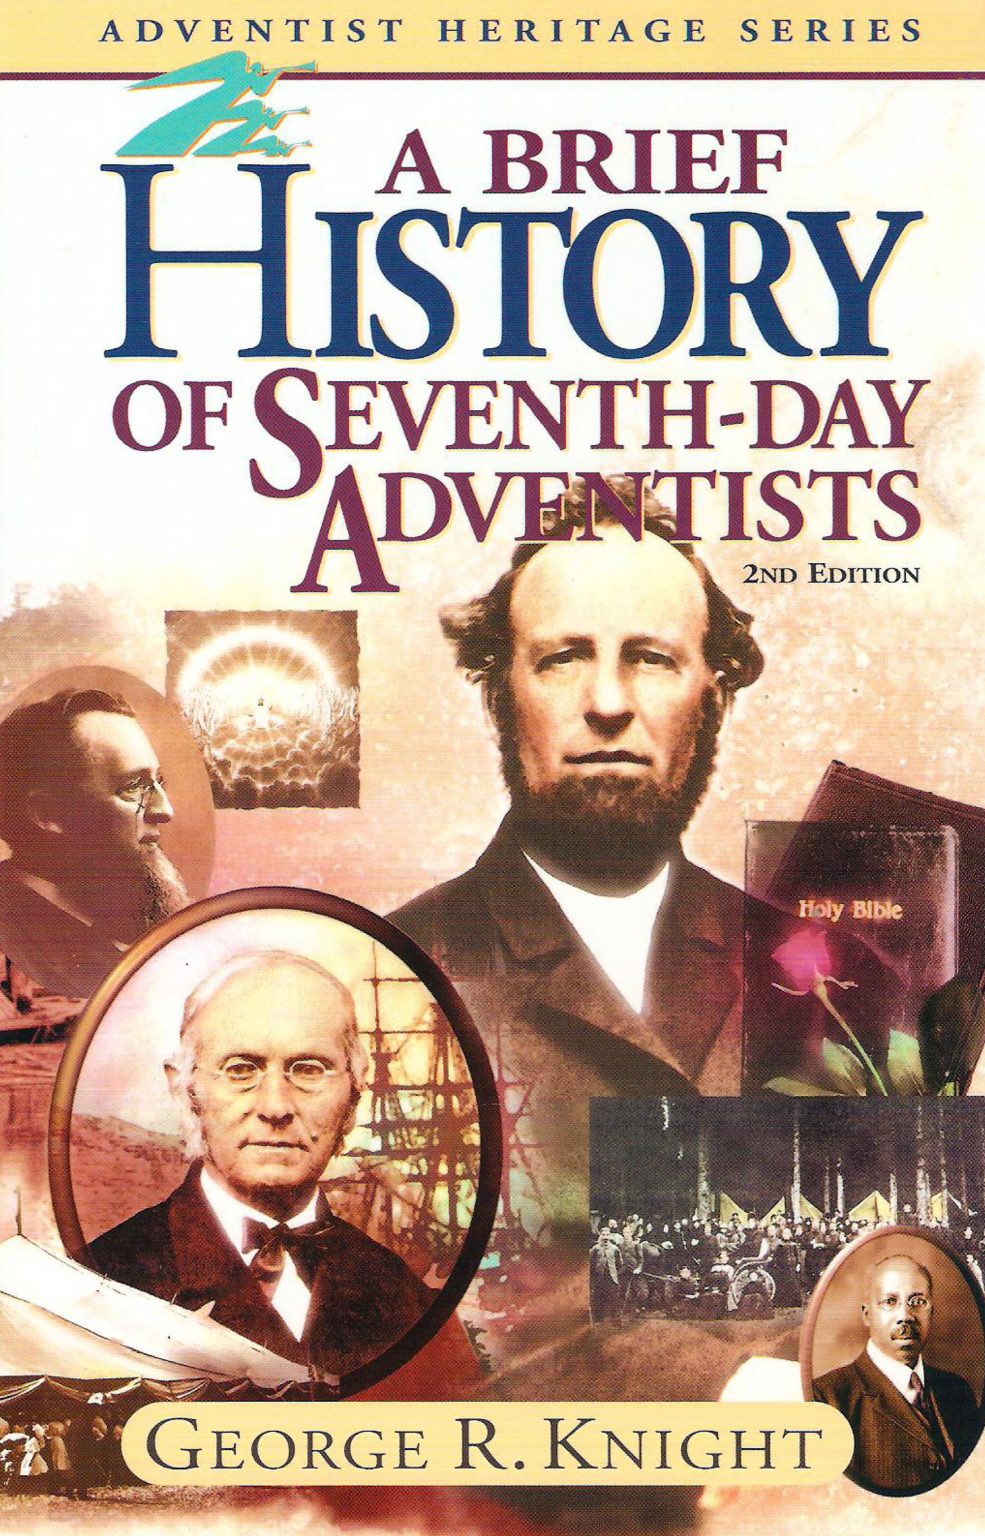 A Brief History of Seventhday Adventists Adventist Heritage Ministries